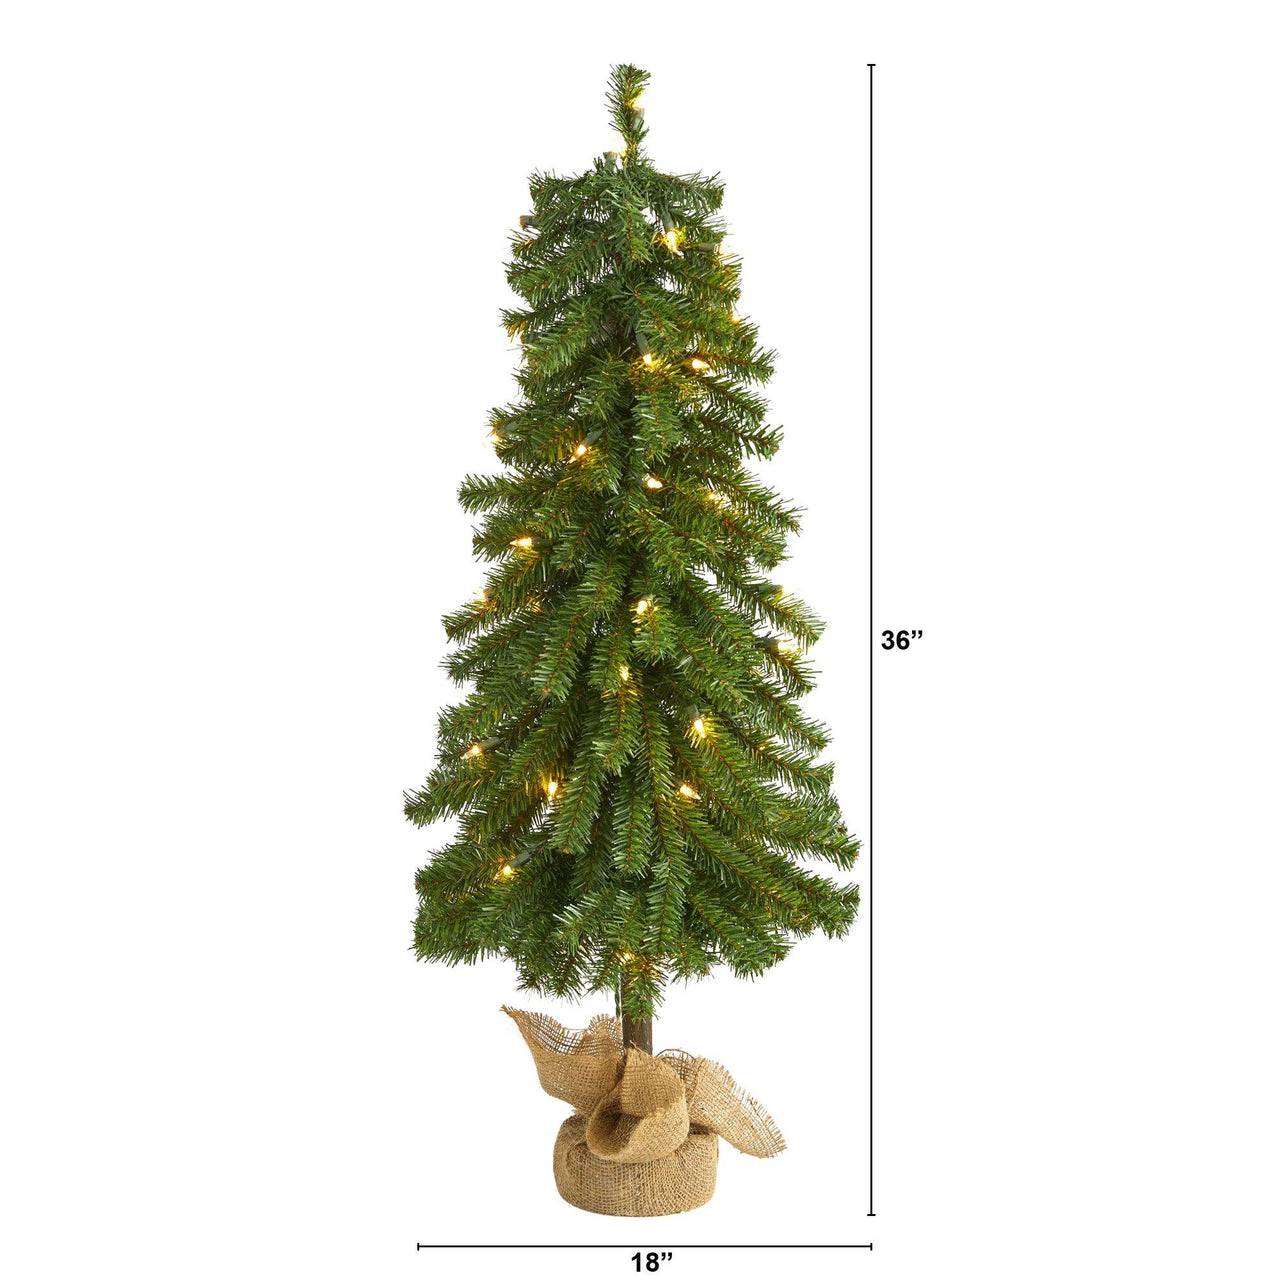 3' Alpine Artificial Christmas Tree with 50 Lights, 177 Bendable Branches and a Burlap Planter - The Fox Decor